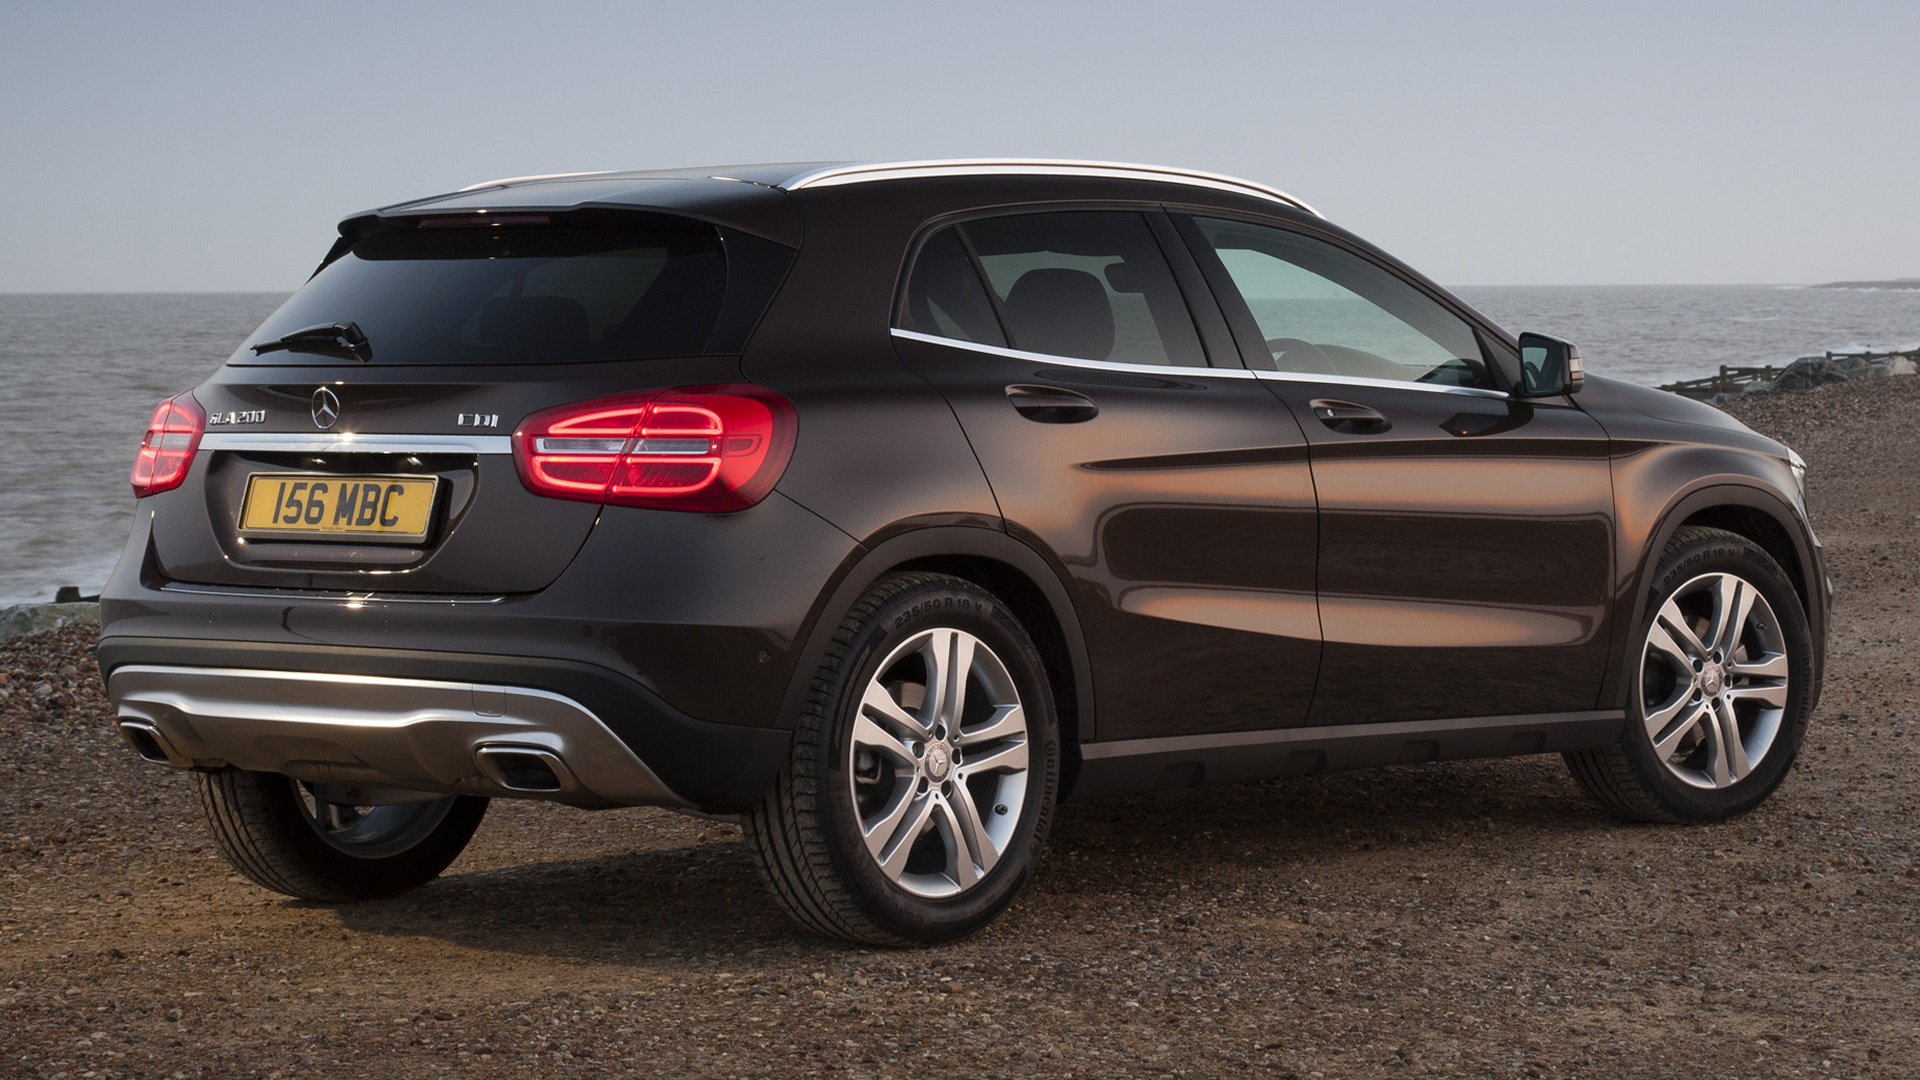 2014 Mercedes-Benz GLA-Class (UK) - Wallpapers and HD ...